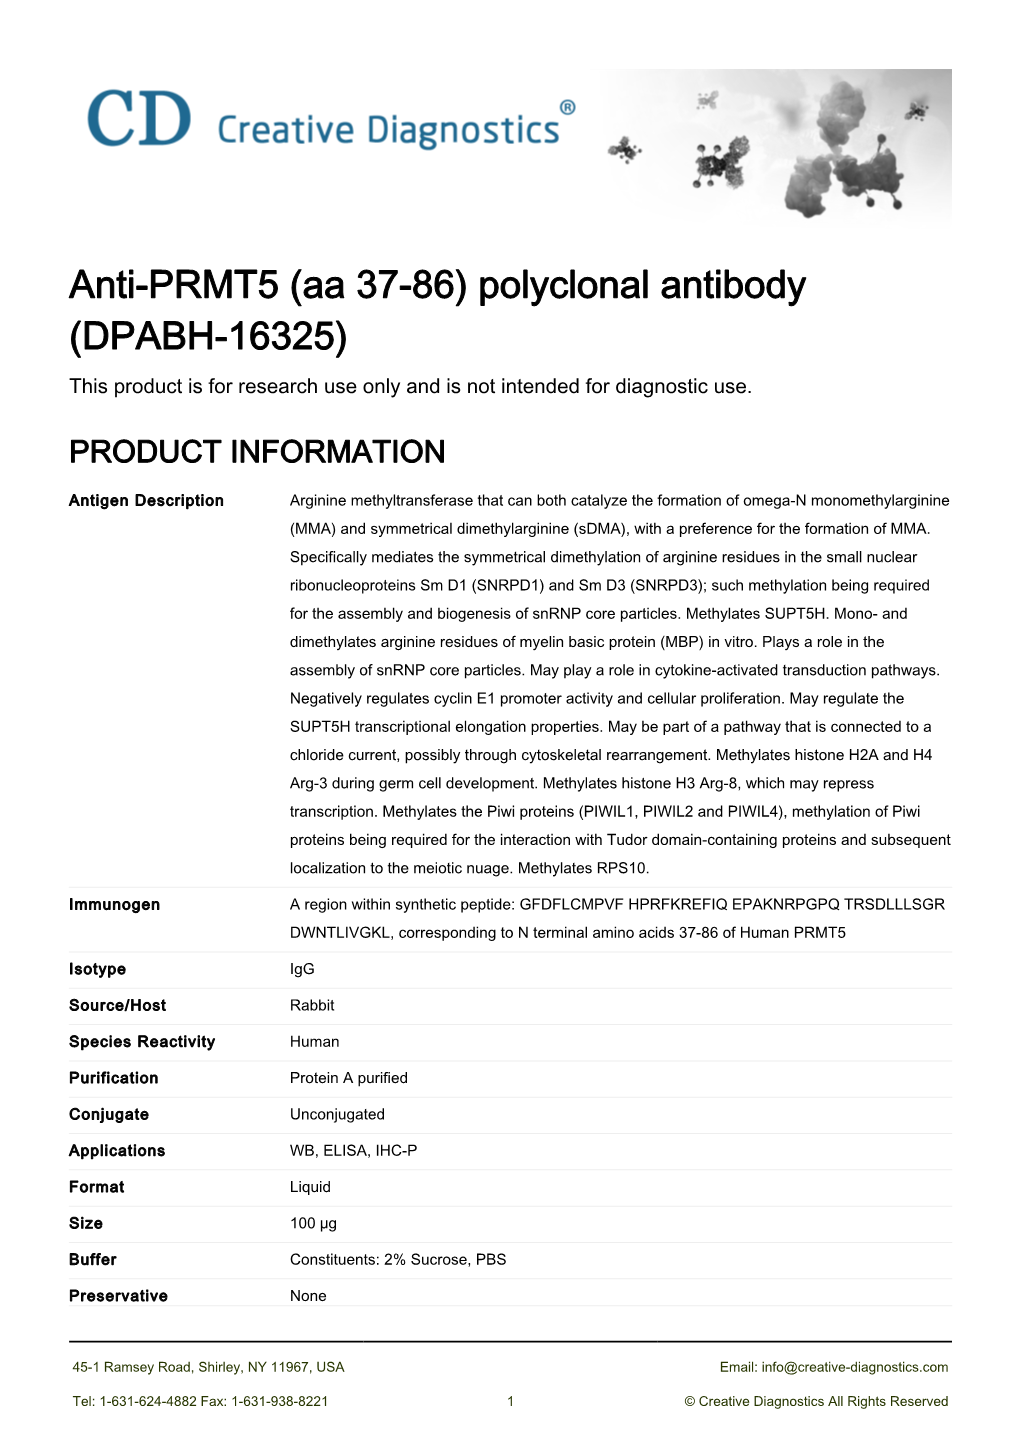 Anti-PRMT5 (Aa 37-86) Polyclonal Antibody (DPABH-16325) This Product Is for Research Use Only and Is Not Intended for Diagnostic Use